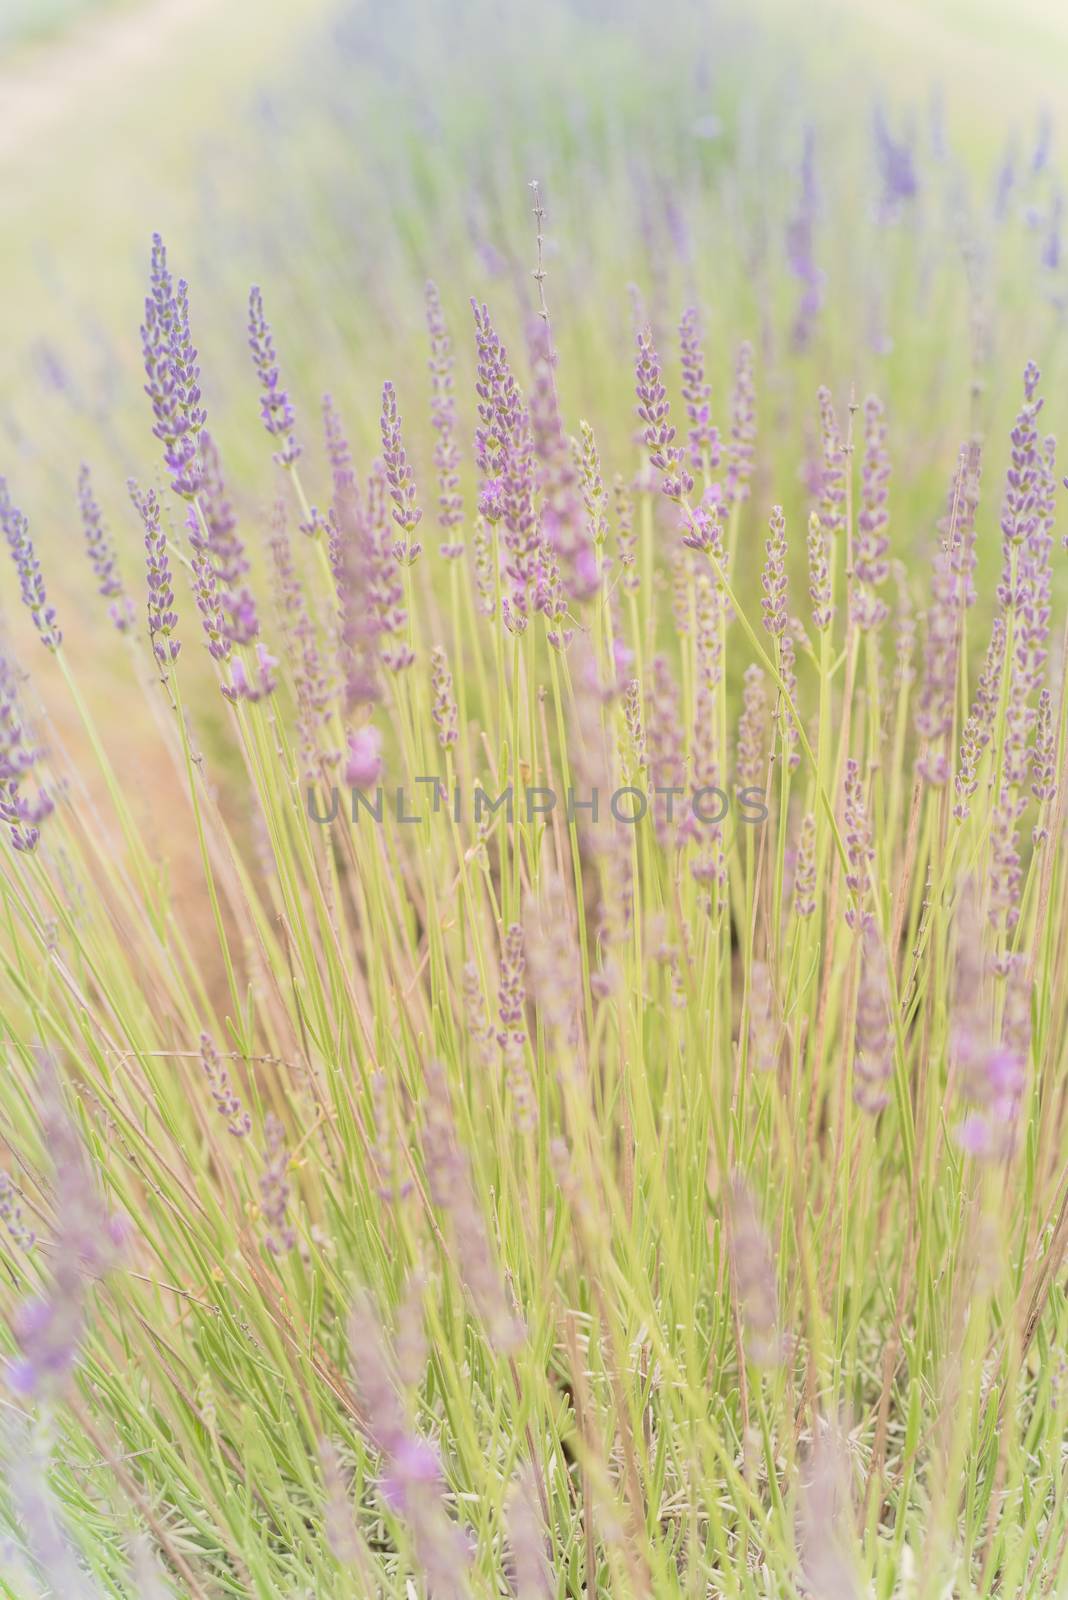 Full blossom lavender bush at organic farm near Dallas, Texas, USA with warm sunset light. Close-up view blooming lavender flower